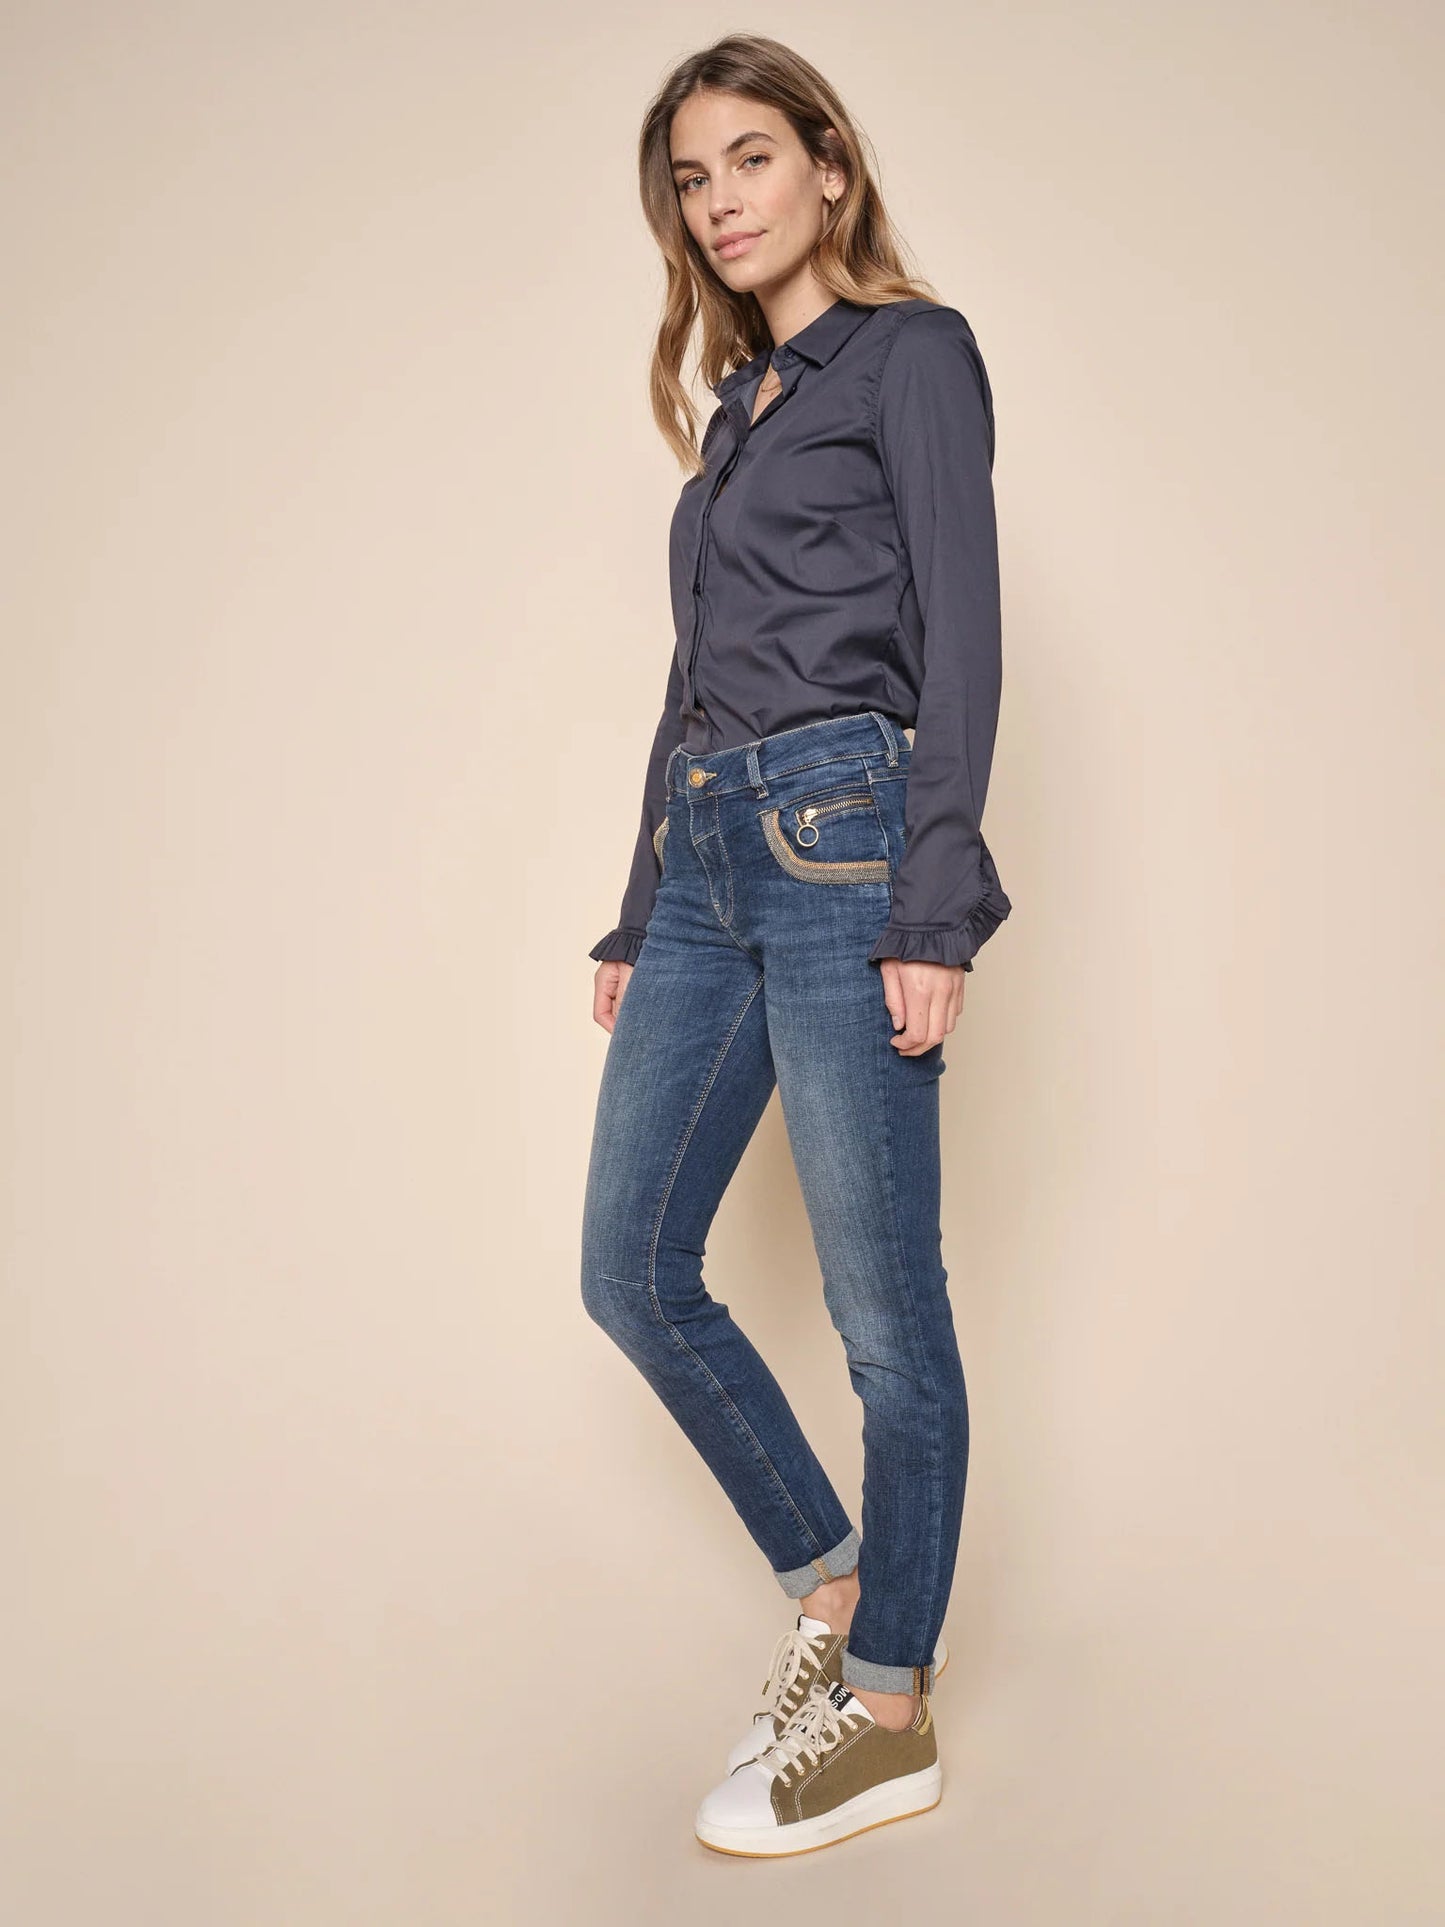 Model wearing a blue silk shirt and Mos Mosh Naomi Achilles Jeans Dark Blue with trainers